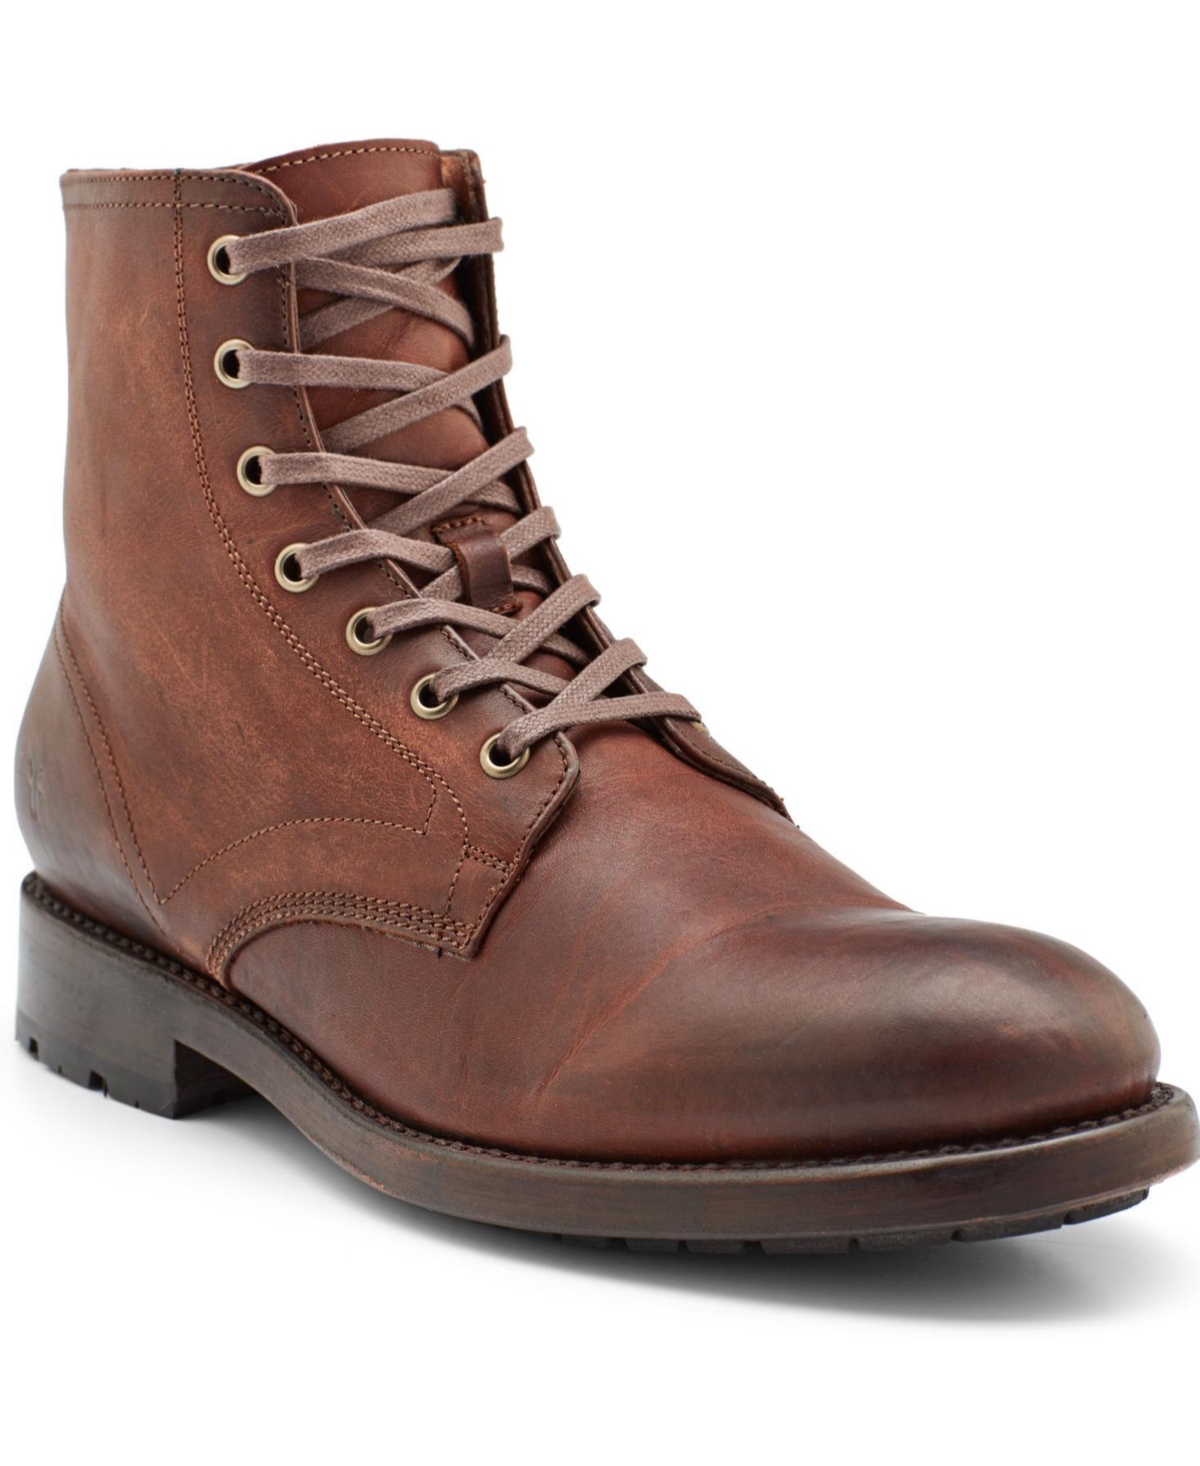 Men's Bowery Lace-up Boots - Cognac Leather